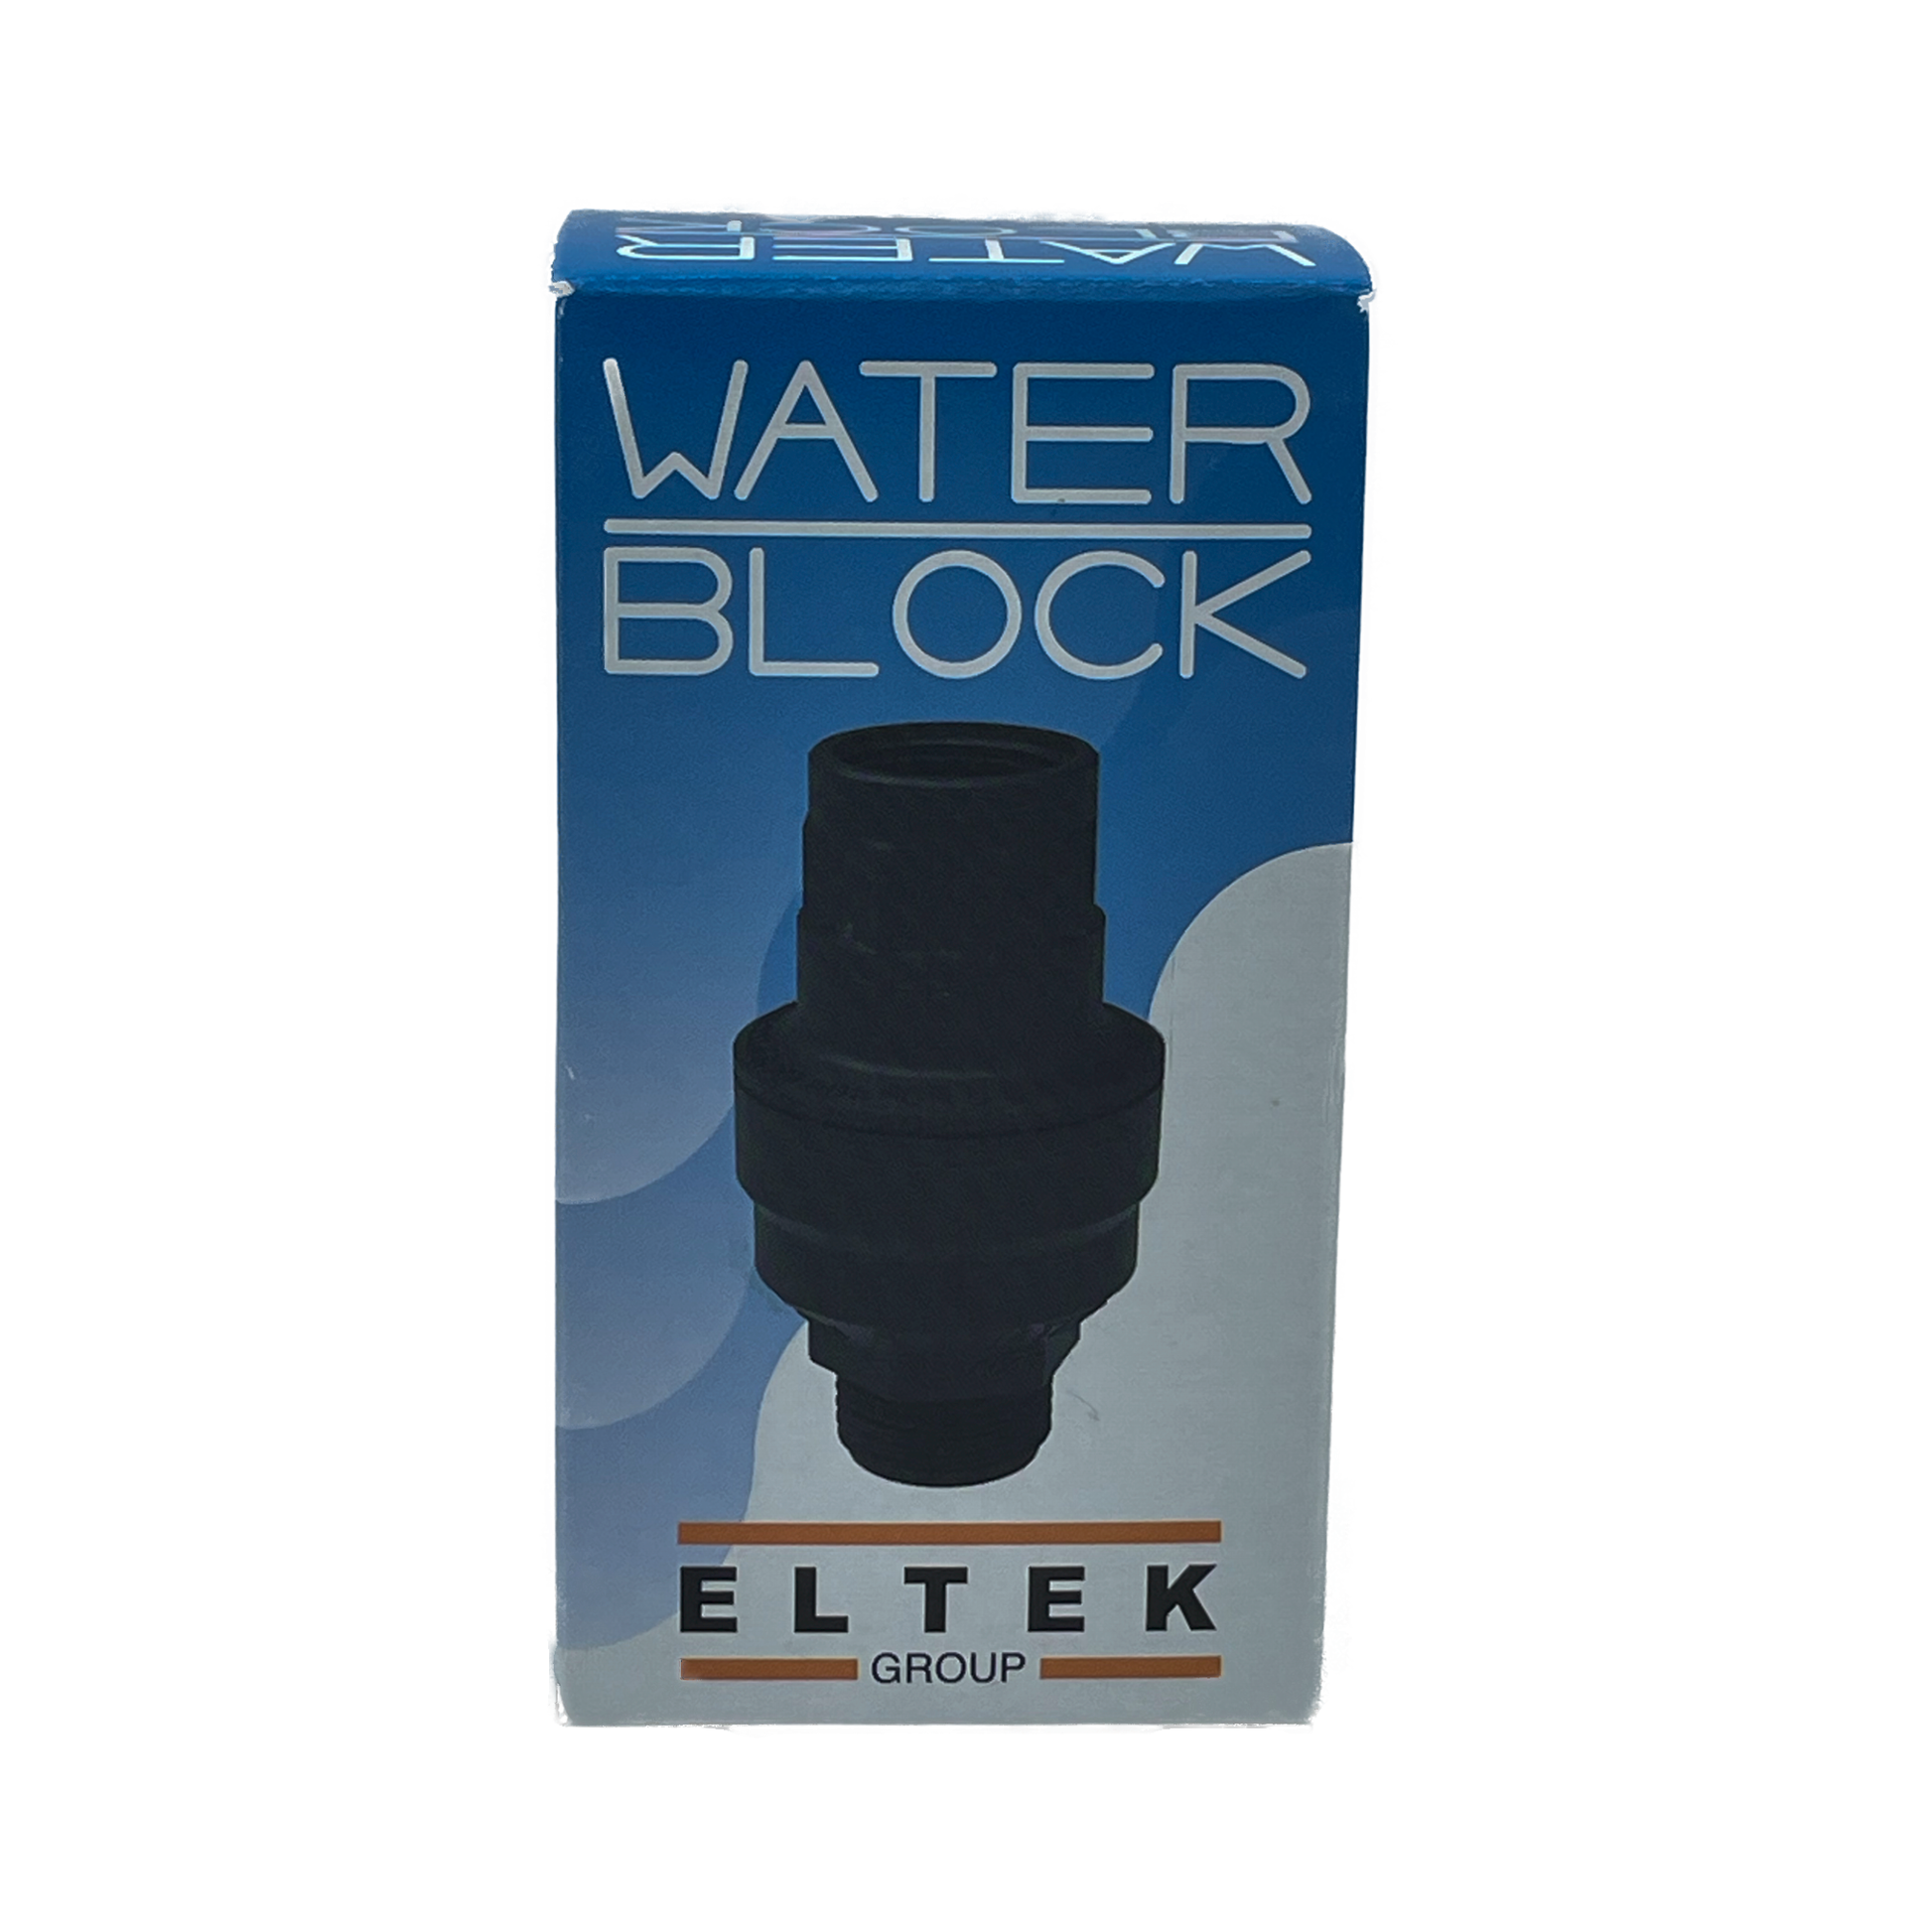 The box which contains the Water Block which is made by ELTEK Group in Poland. Designed for water based applications and equipment in the United States, Canada, Mexico, and North America in general. Inside the box are instructions as to how to install and operate the Water Block. Also included is a white pick which is used to adjust the settings dial on the outlet side of the device. Product meant for end consumers and manufacturers.